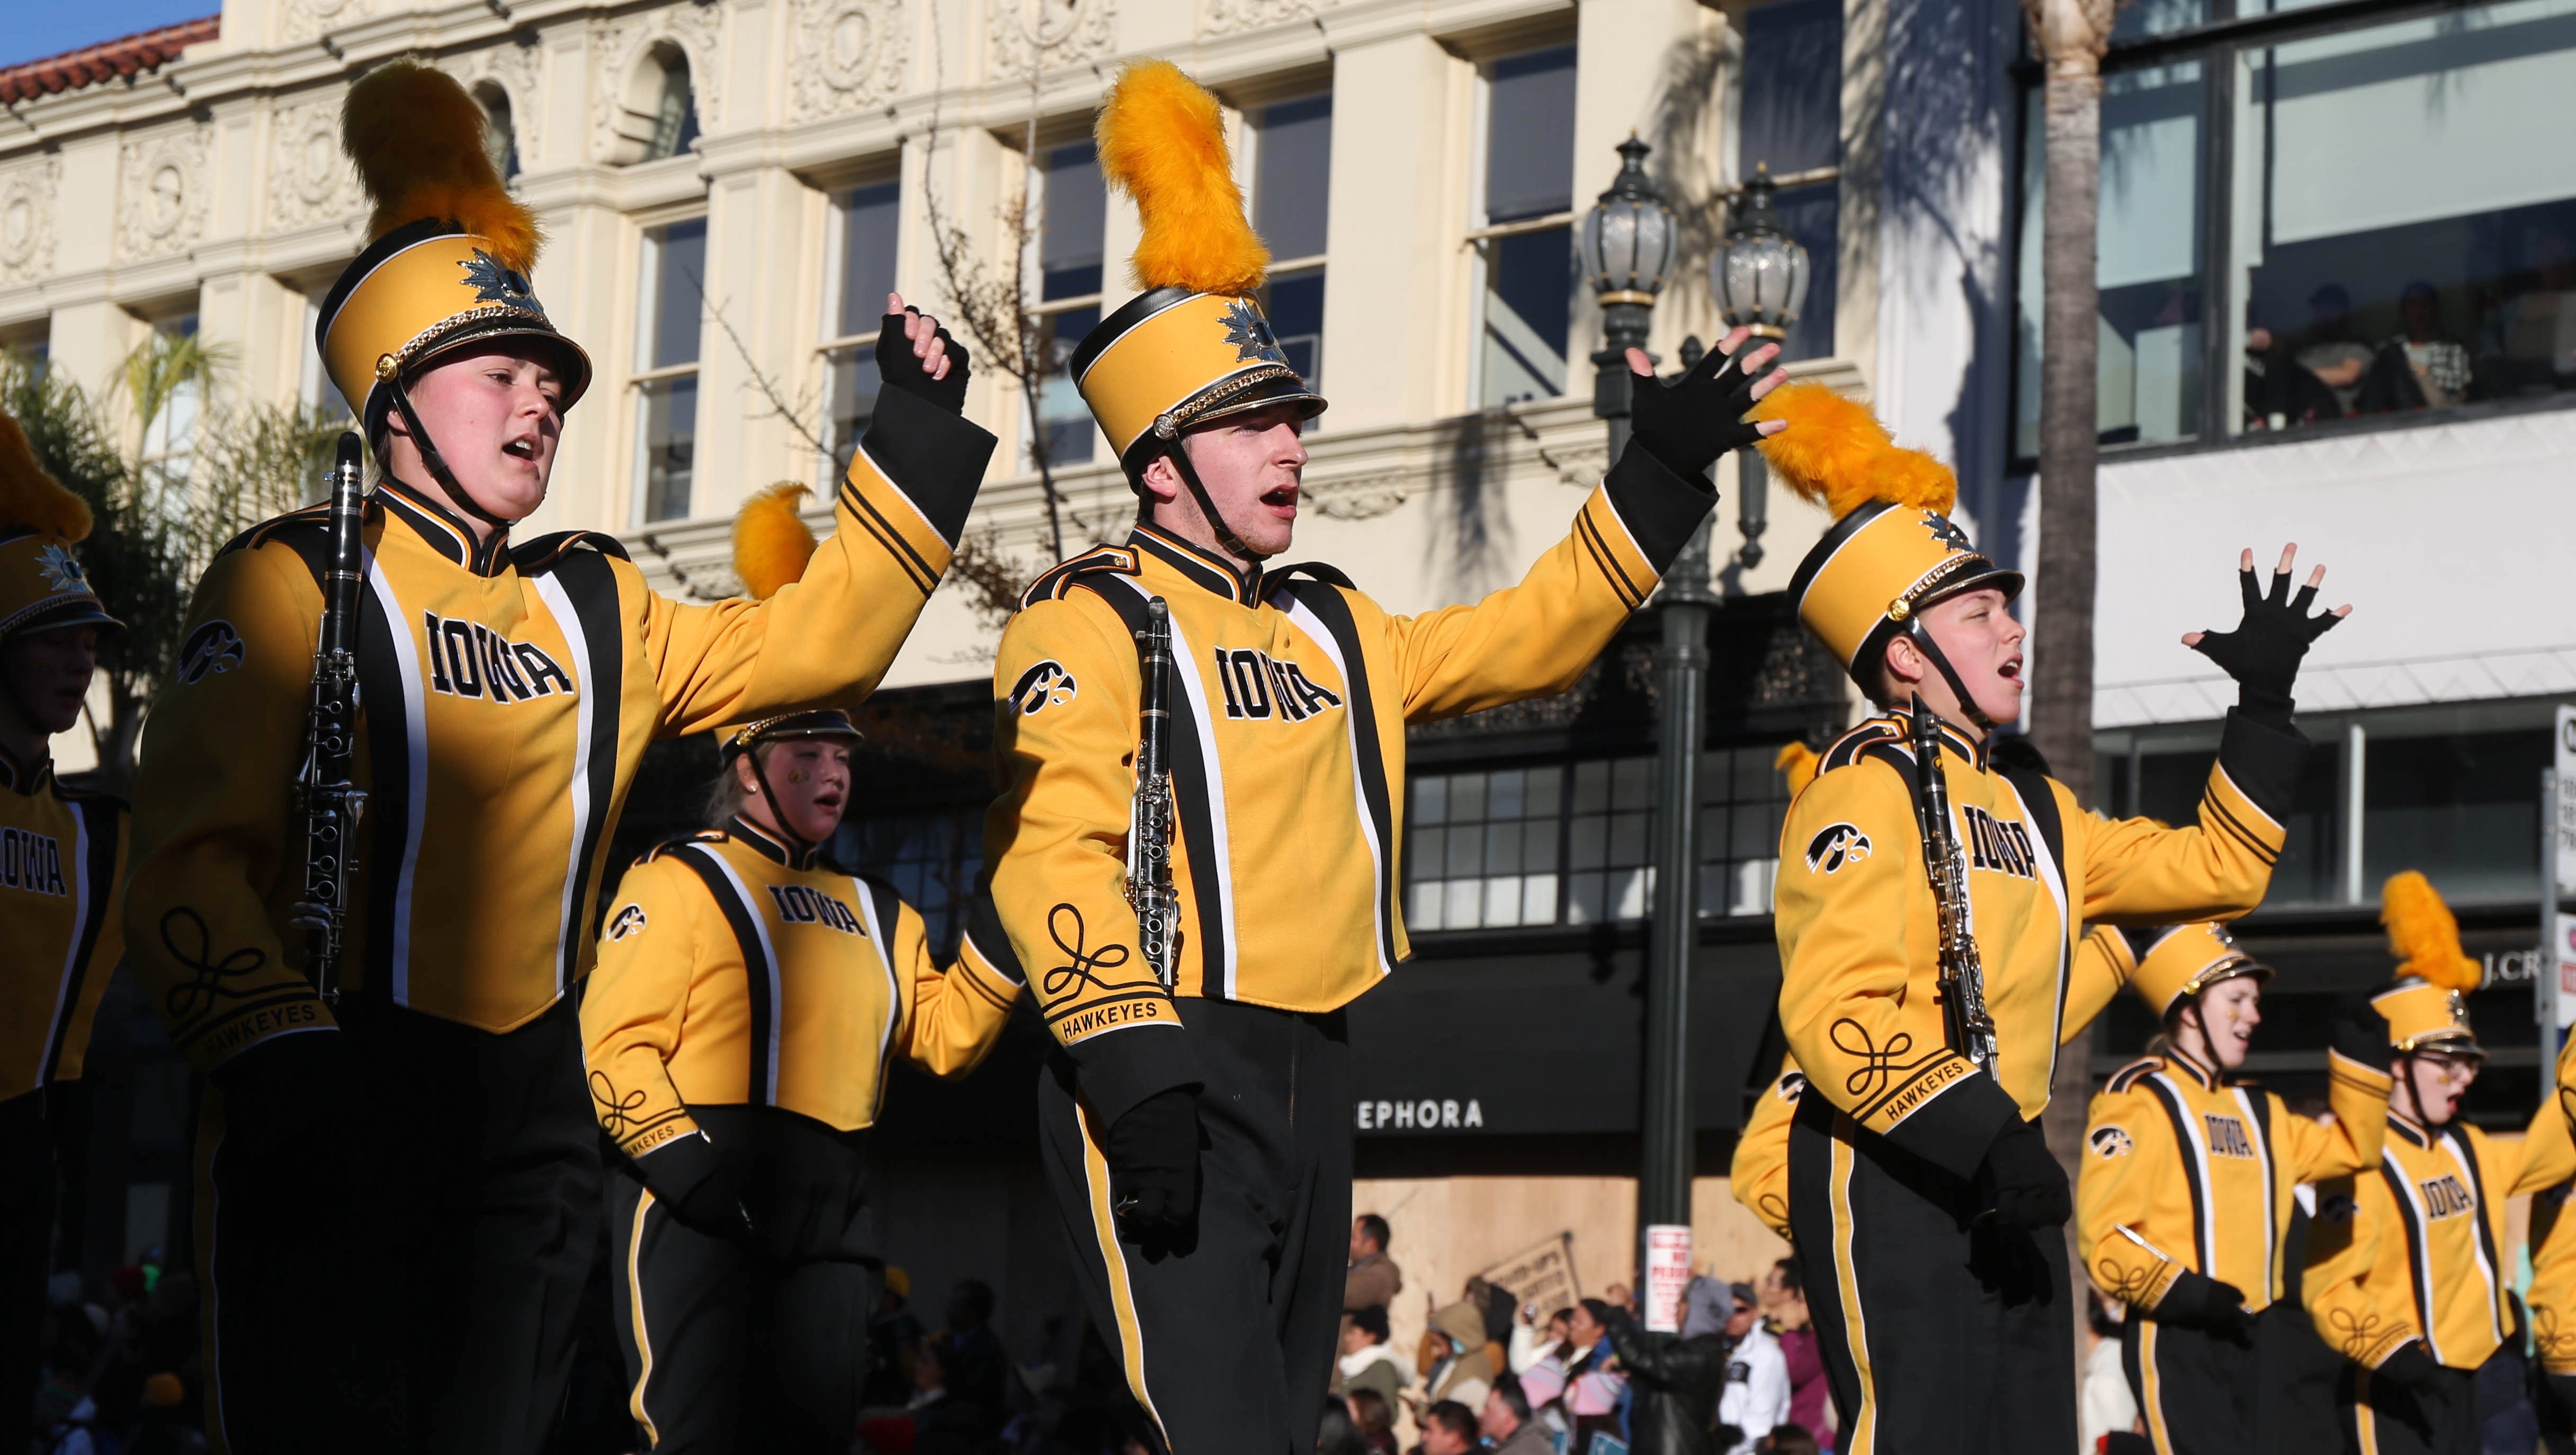 Members of the University of Iowa Marching Band perform as they march along Colorado Blvd. on Friday, Jan. 1, 2016, during the 2016 Tournament of Roses Parade in Pasadena, Calif.